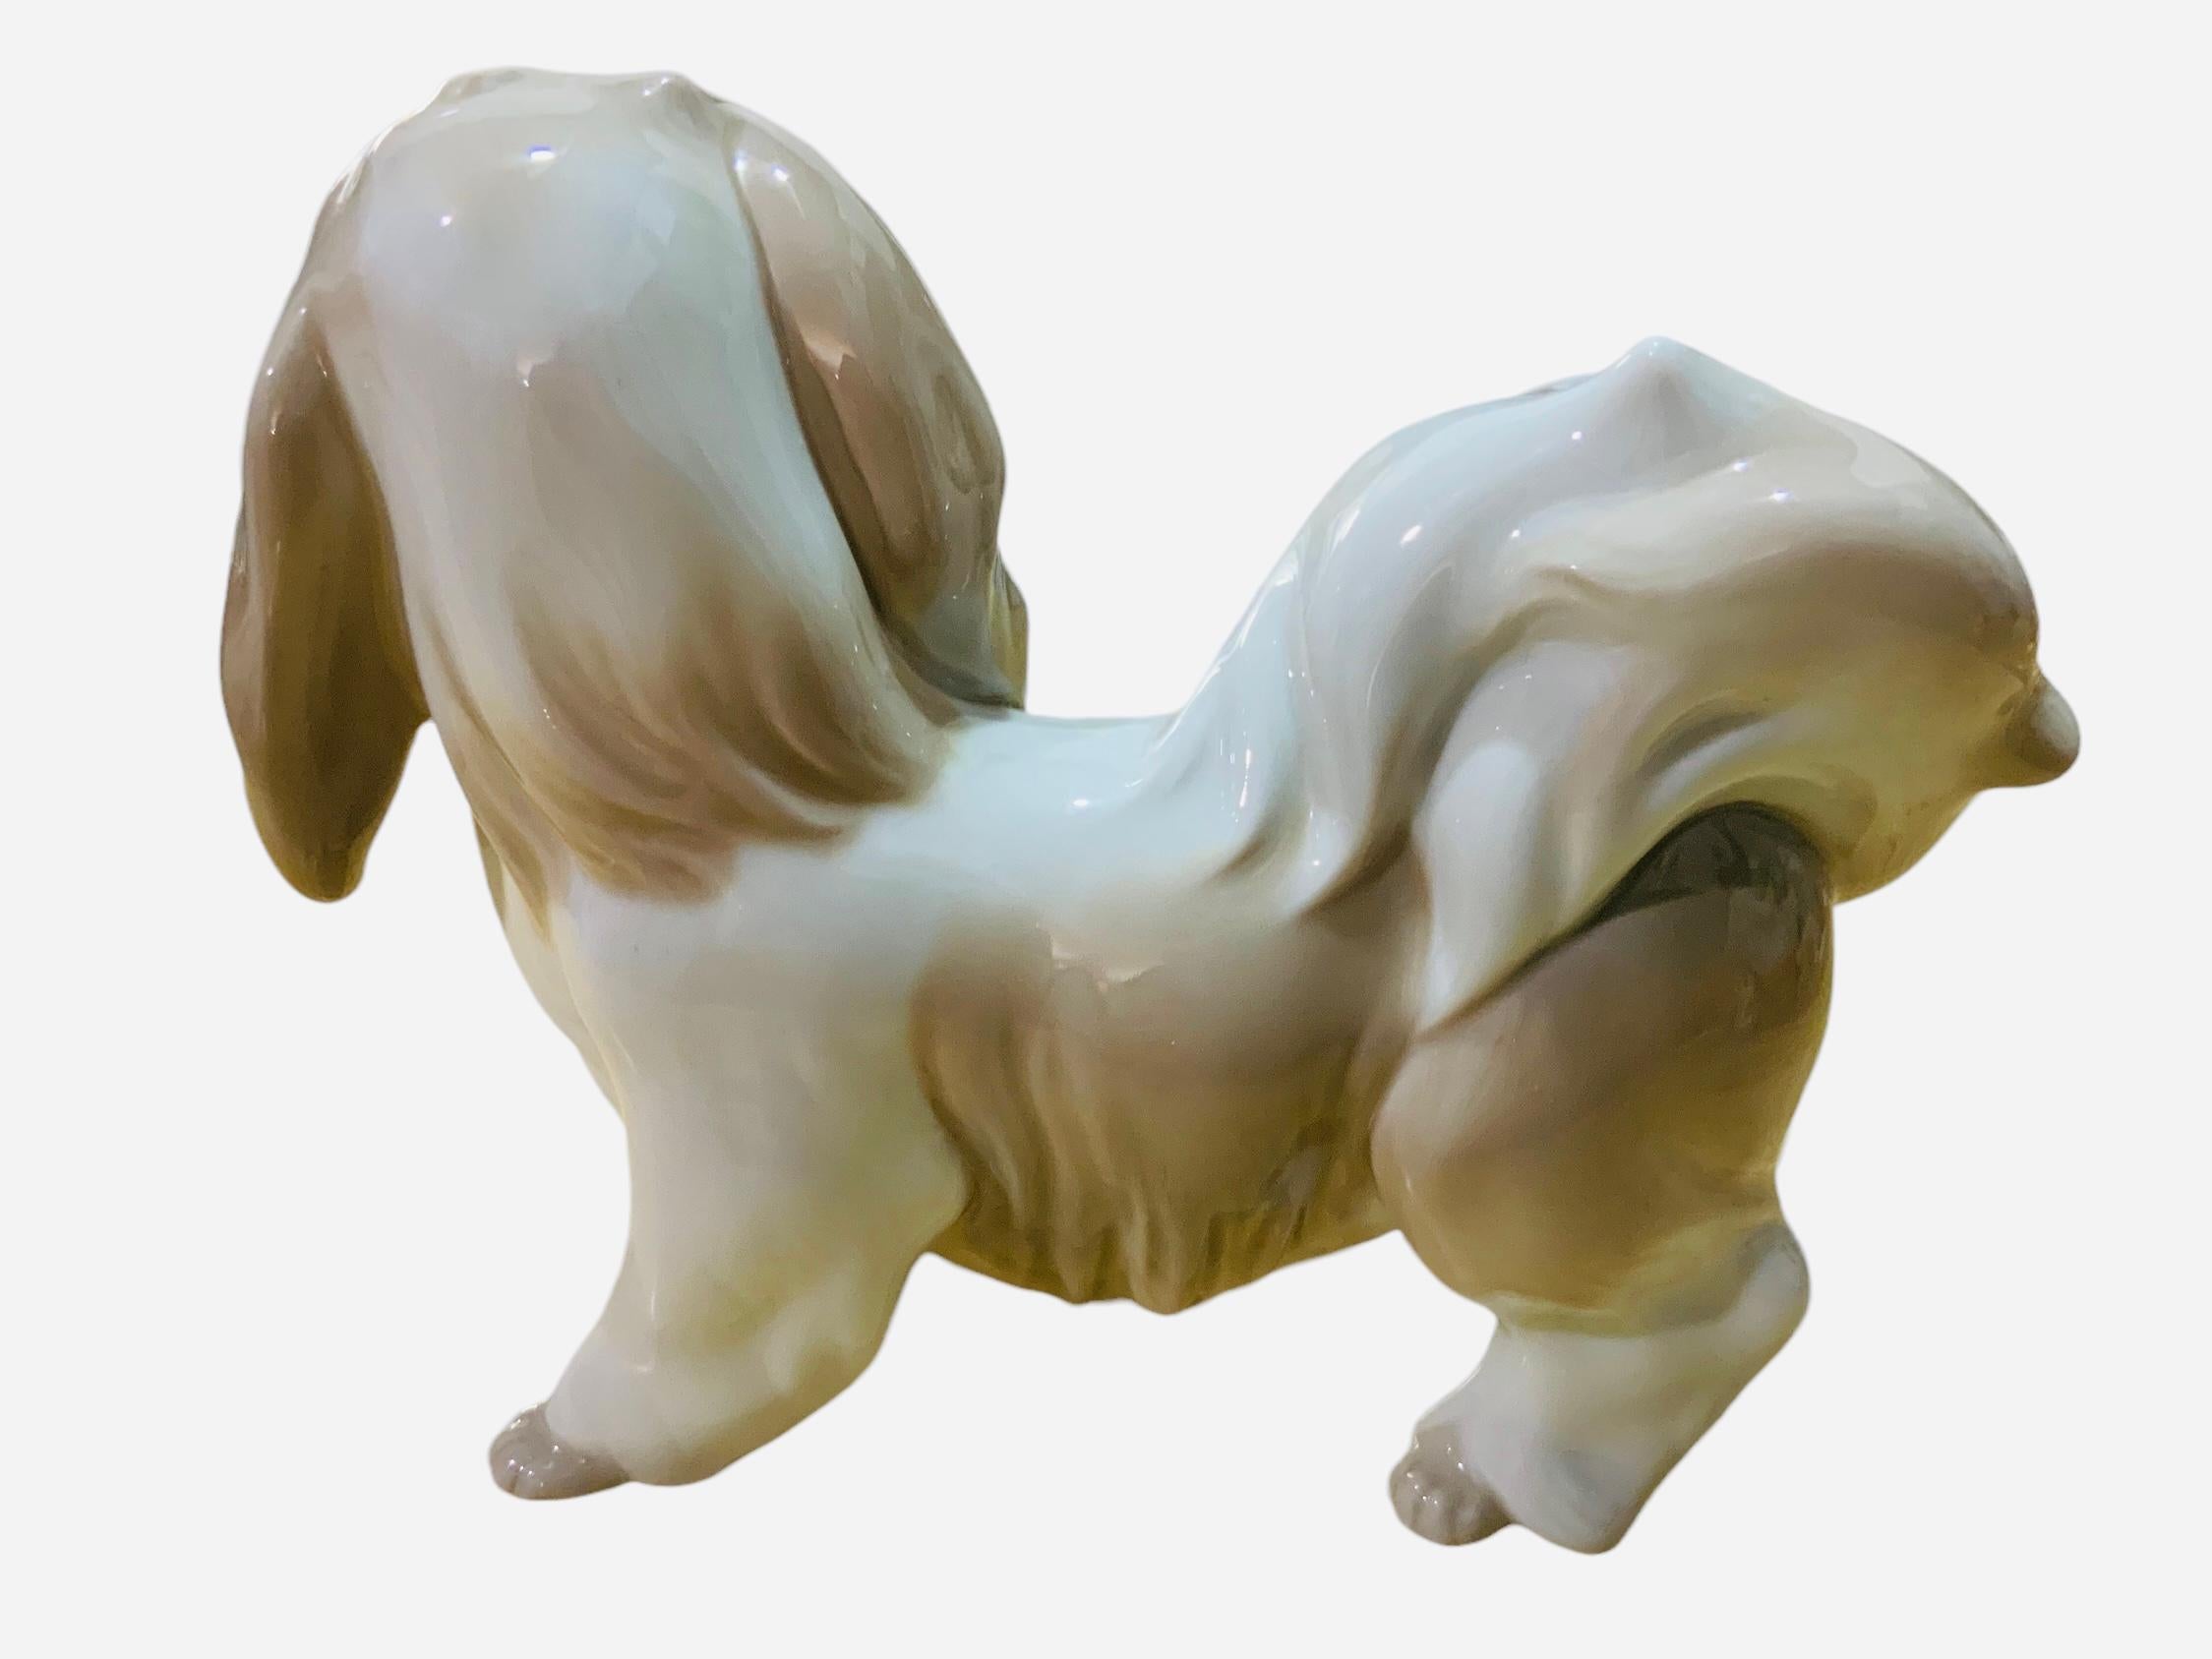 This is a Lladro porcelain figurine of a dog. It depicts a very well done hand painted white and light brown dog. The Lhasa Apso is standing up with a lot of wavy hair and a “I don’t care” gaze. The Lladro hallmark is below the figurine.